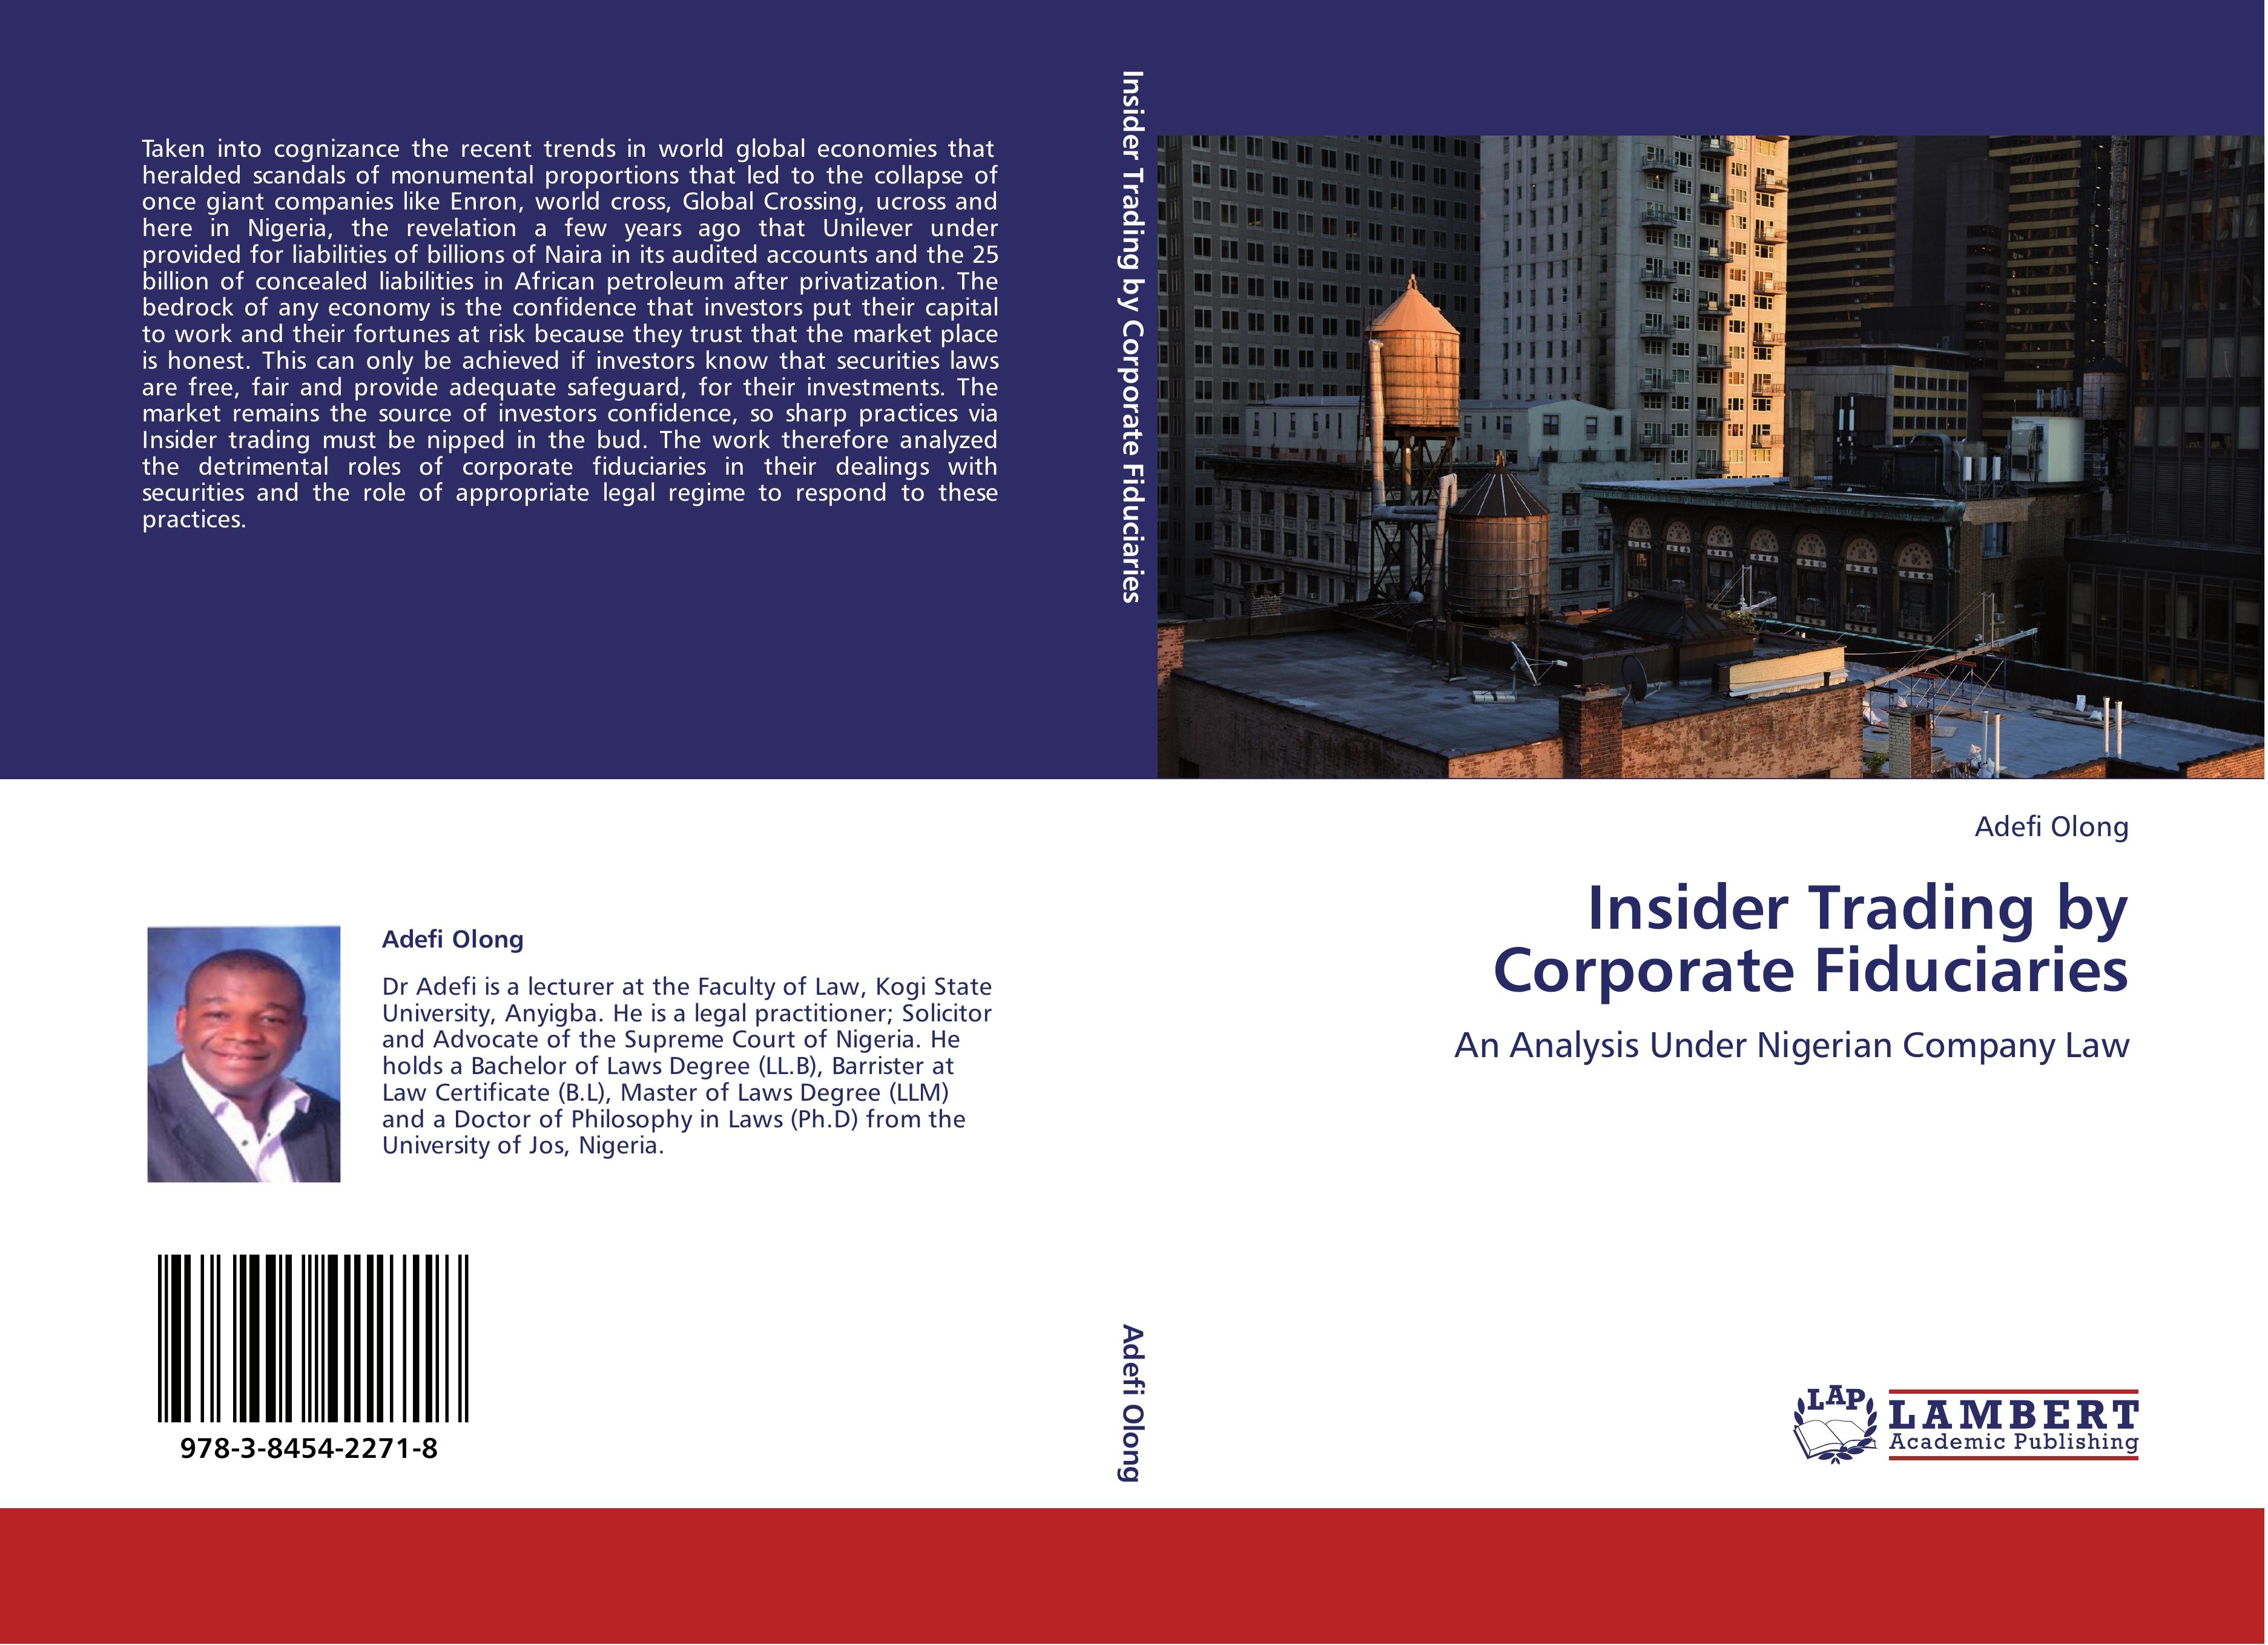 Insider Trading by Corporate Fiduciaries - ADEFI OLONG